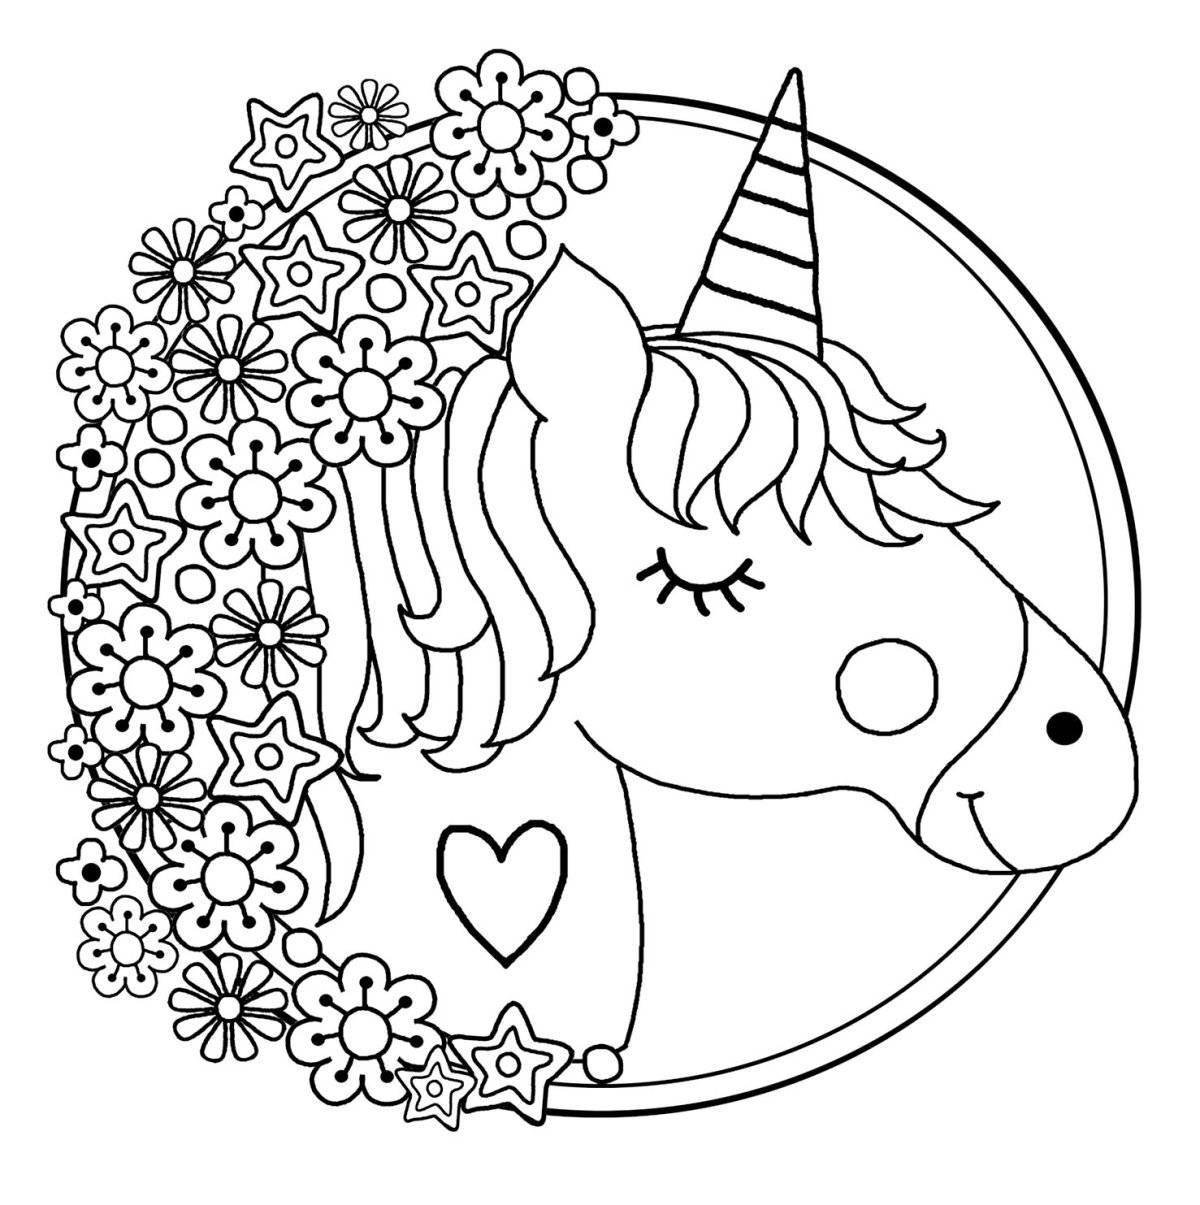 Fairytale coloring book for children 5-6 years old unicorns